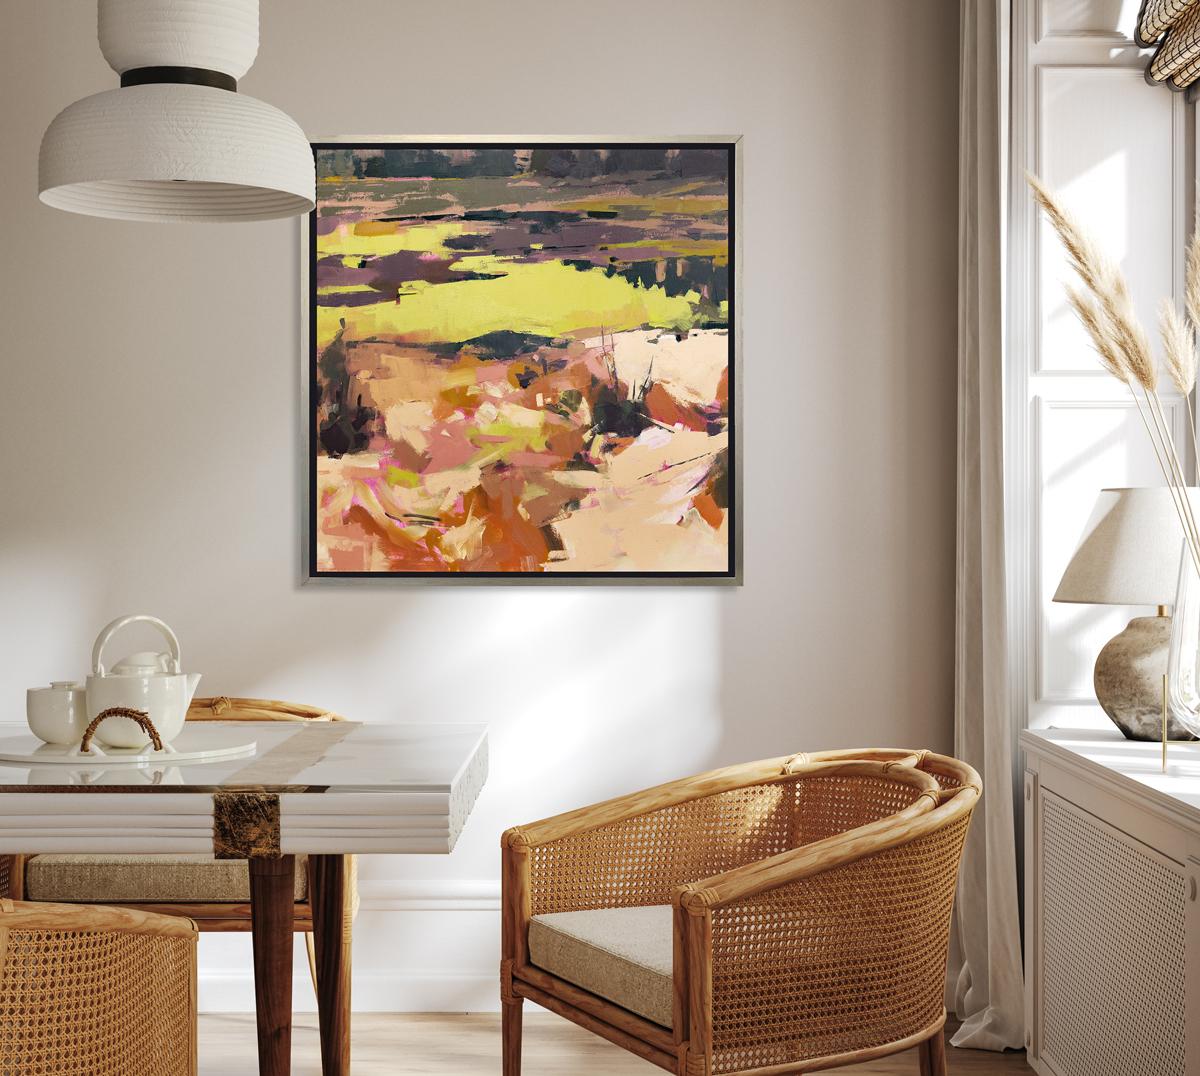 This Limited Edition giclee landscape print by Bri Custer is an edition size of 195. It features a palette of muted orange and earth tones contrasted by vibrant yellow. Printed on canvas, this giclee ships framed in a warm silver floater frame wired